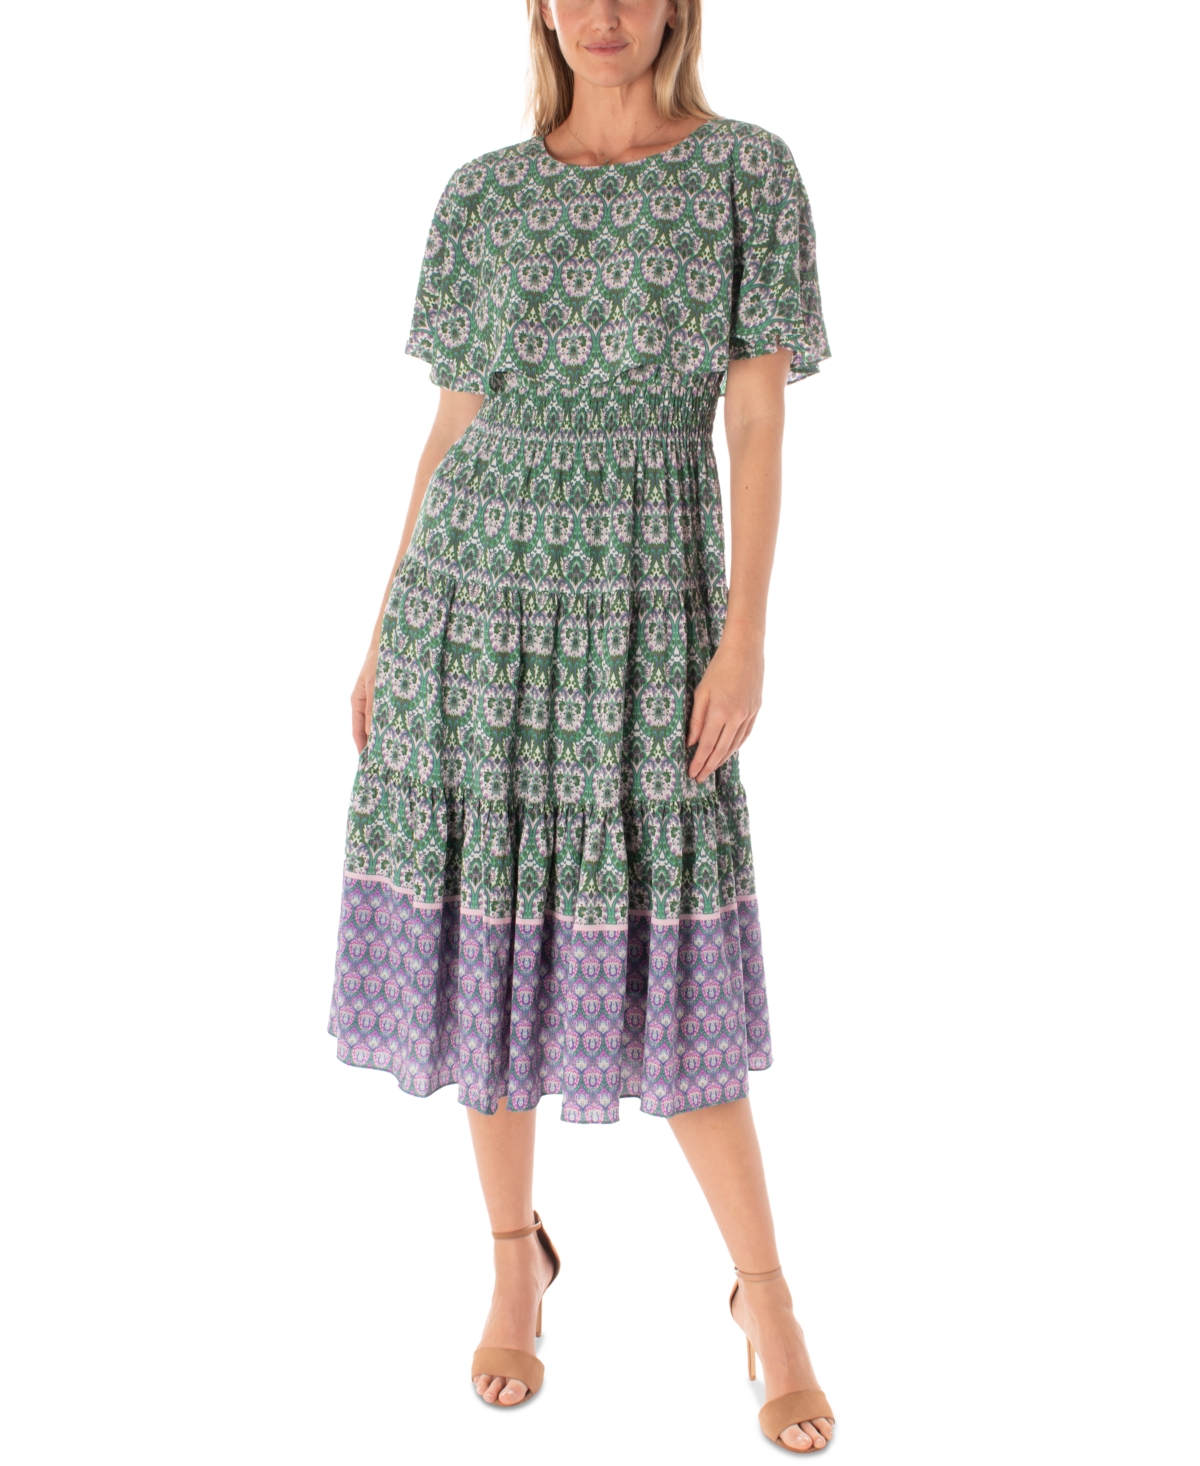 Maison Tara Women's Printed Tiered Fit & Flare Dress In Peacock,violet